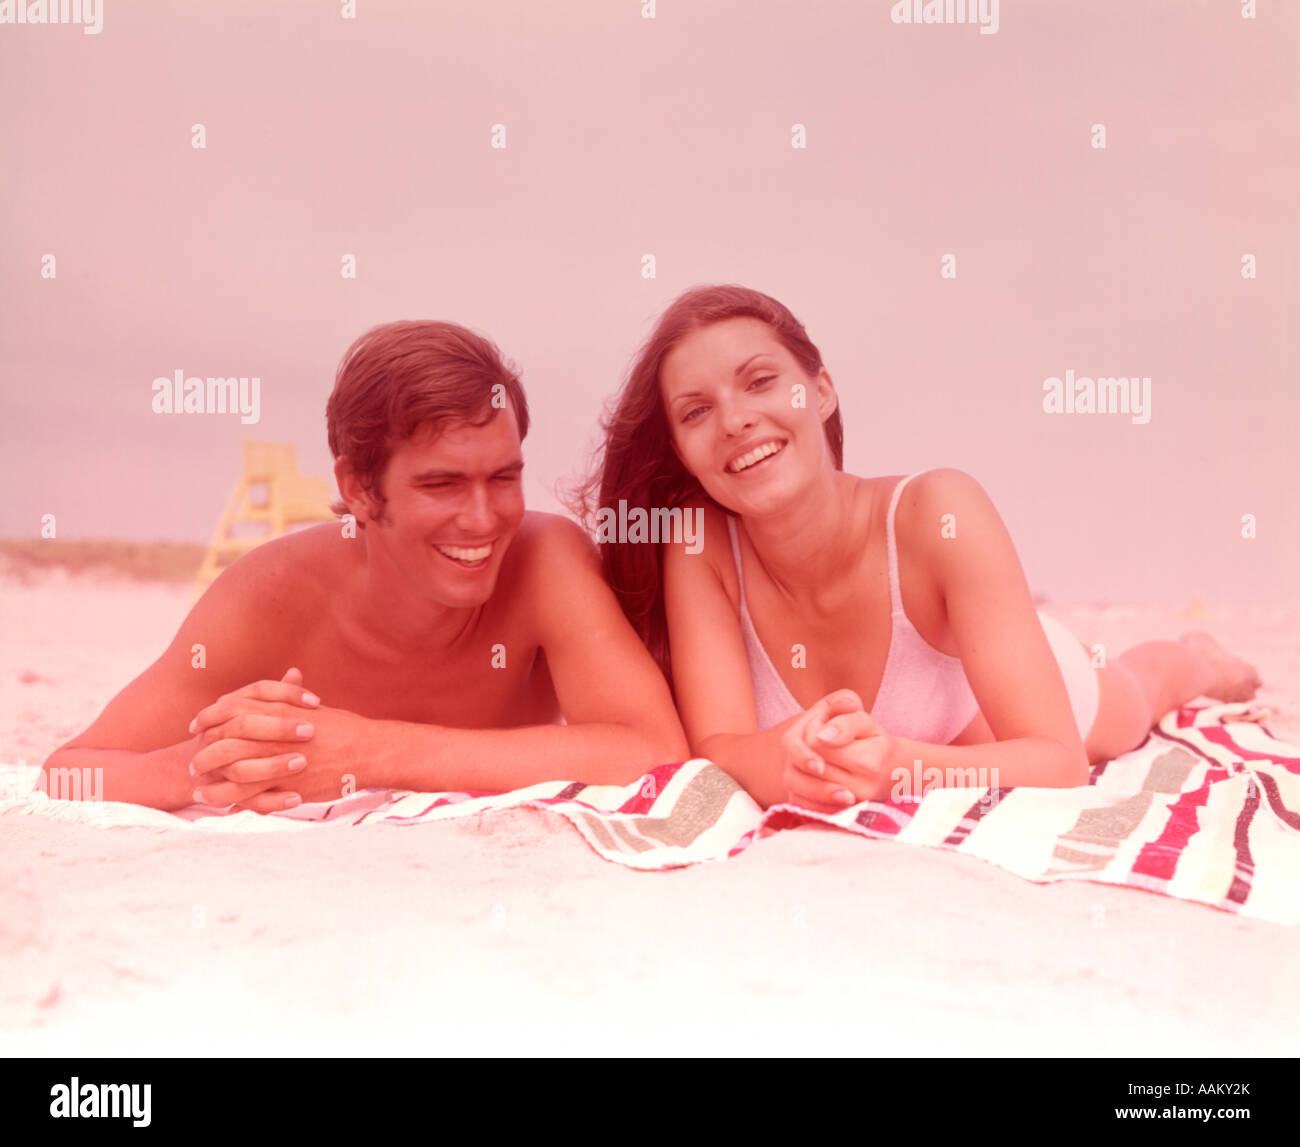 1960s SMILING YOUNG COUPLE LYING SIDE BY SIDE TOGETHER ON BEACH TOWEL Stock Photo